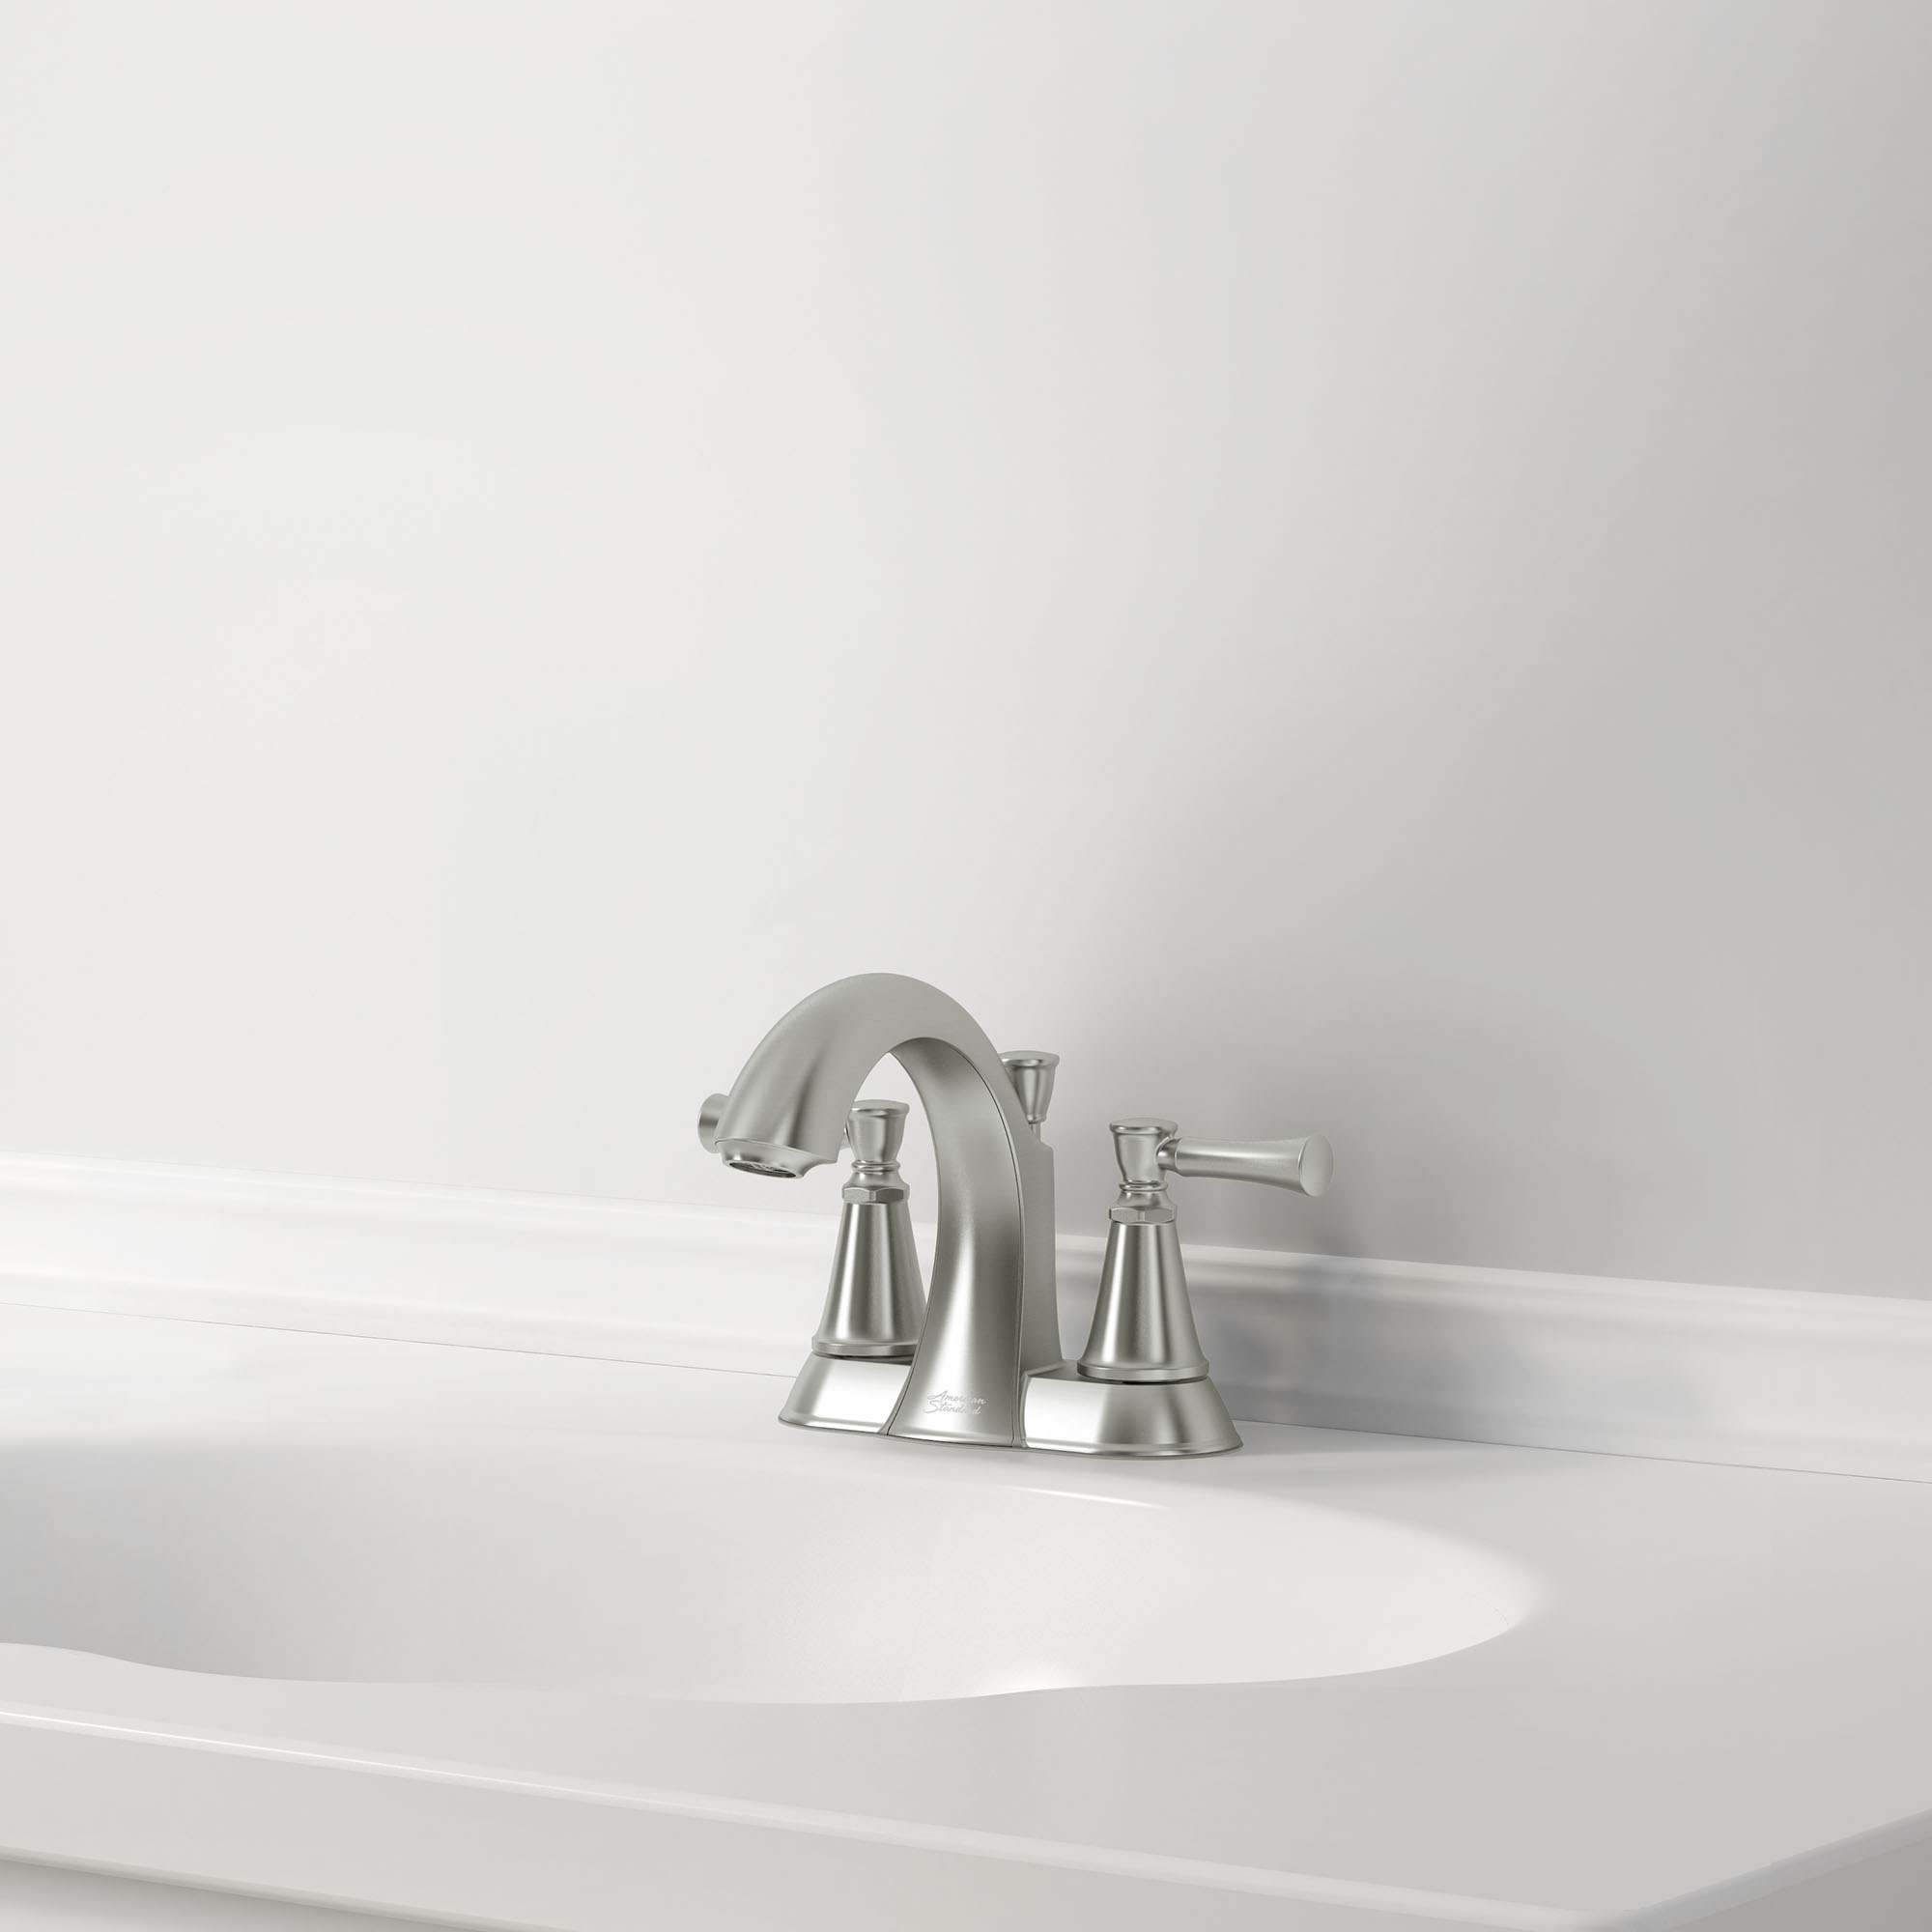 Chancellor® 4-Inch Centerset 2-Handle Bathroom Faucet 1.2 gpm/4.5 L/min With Lever Handles